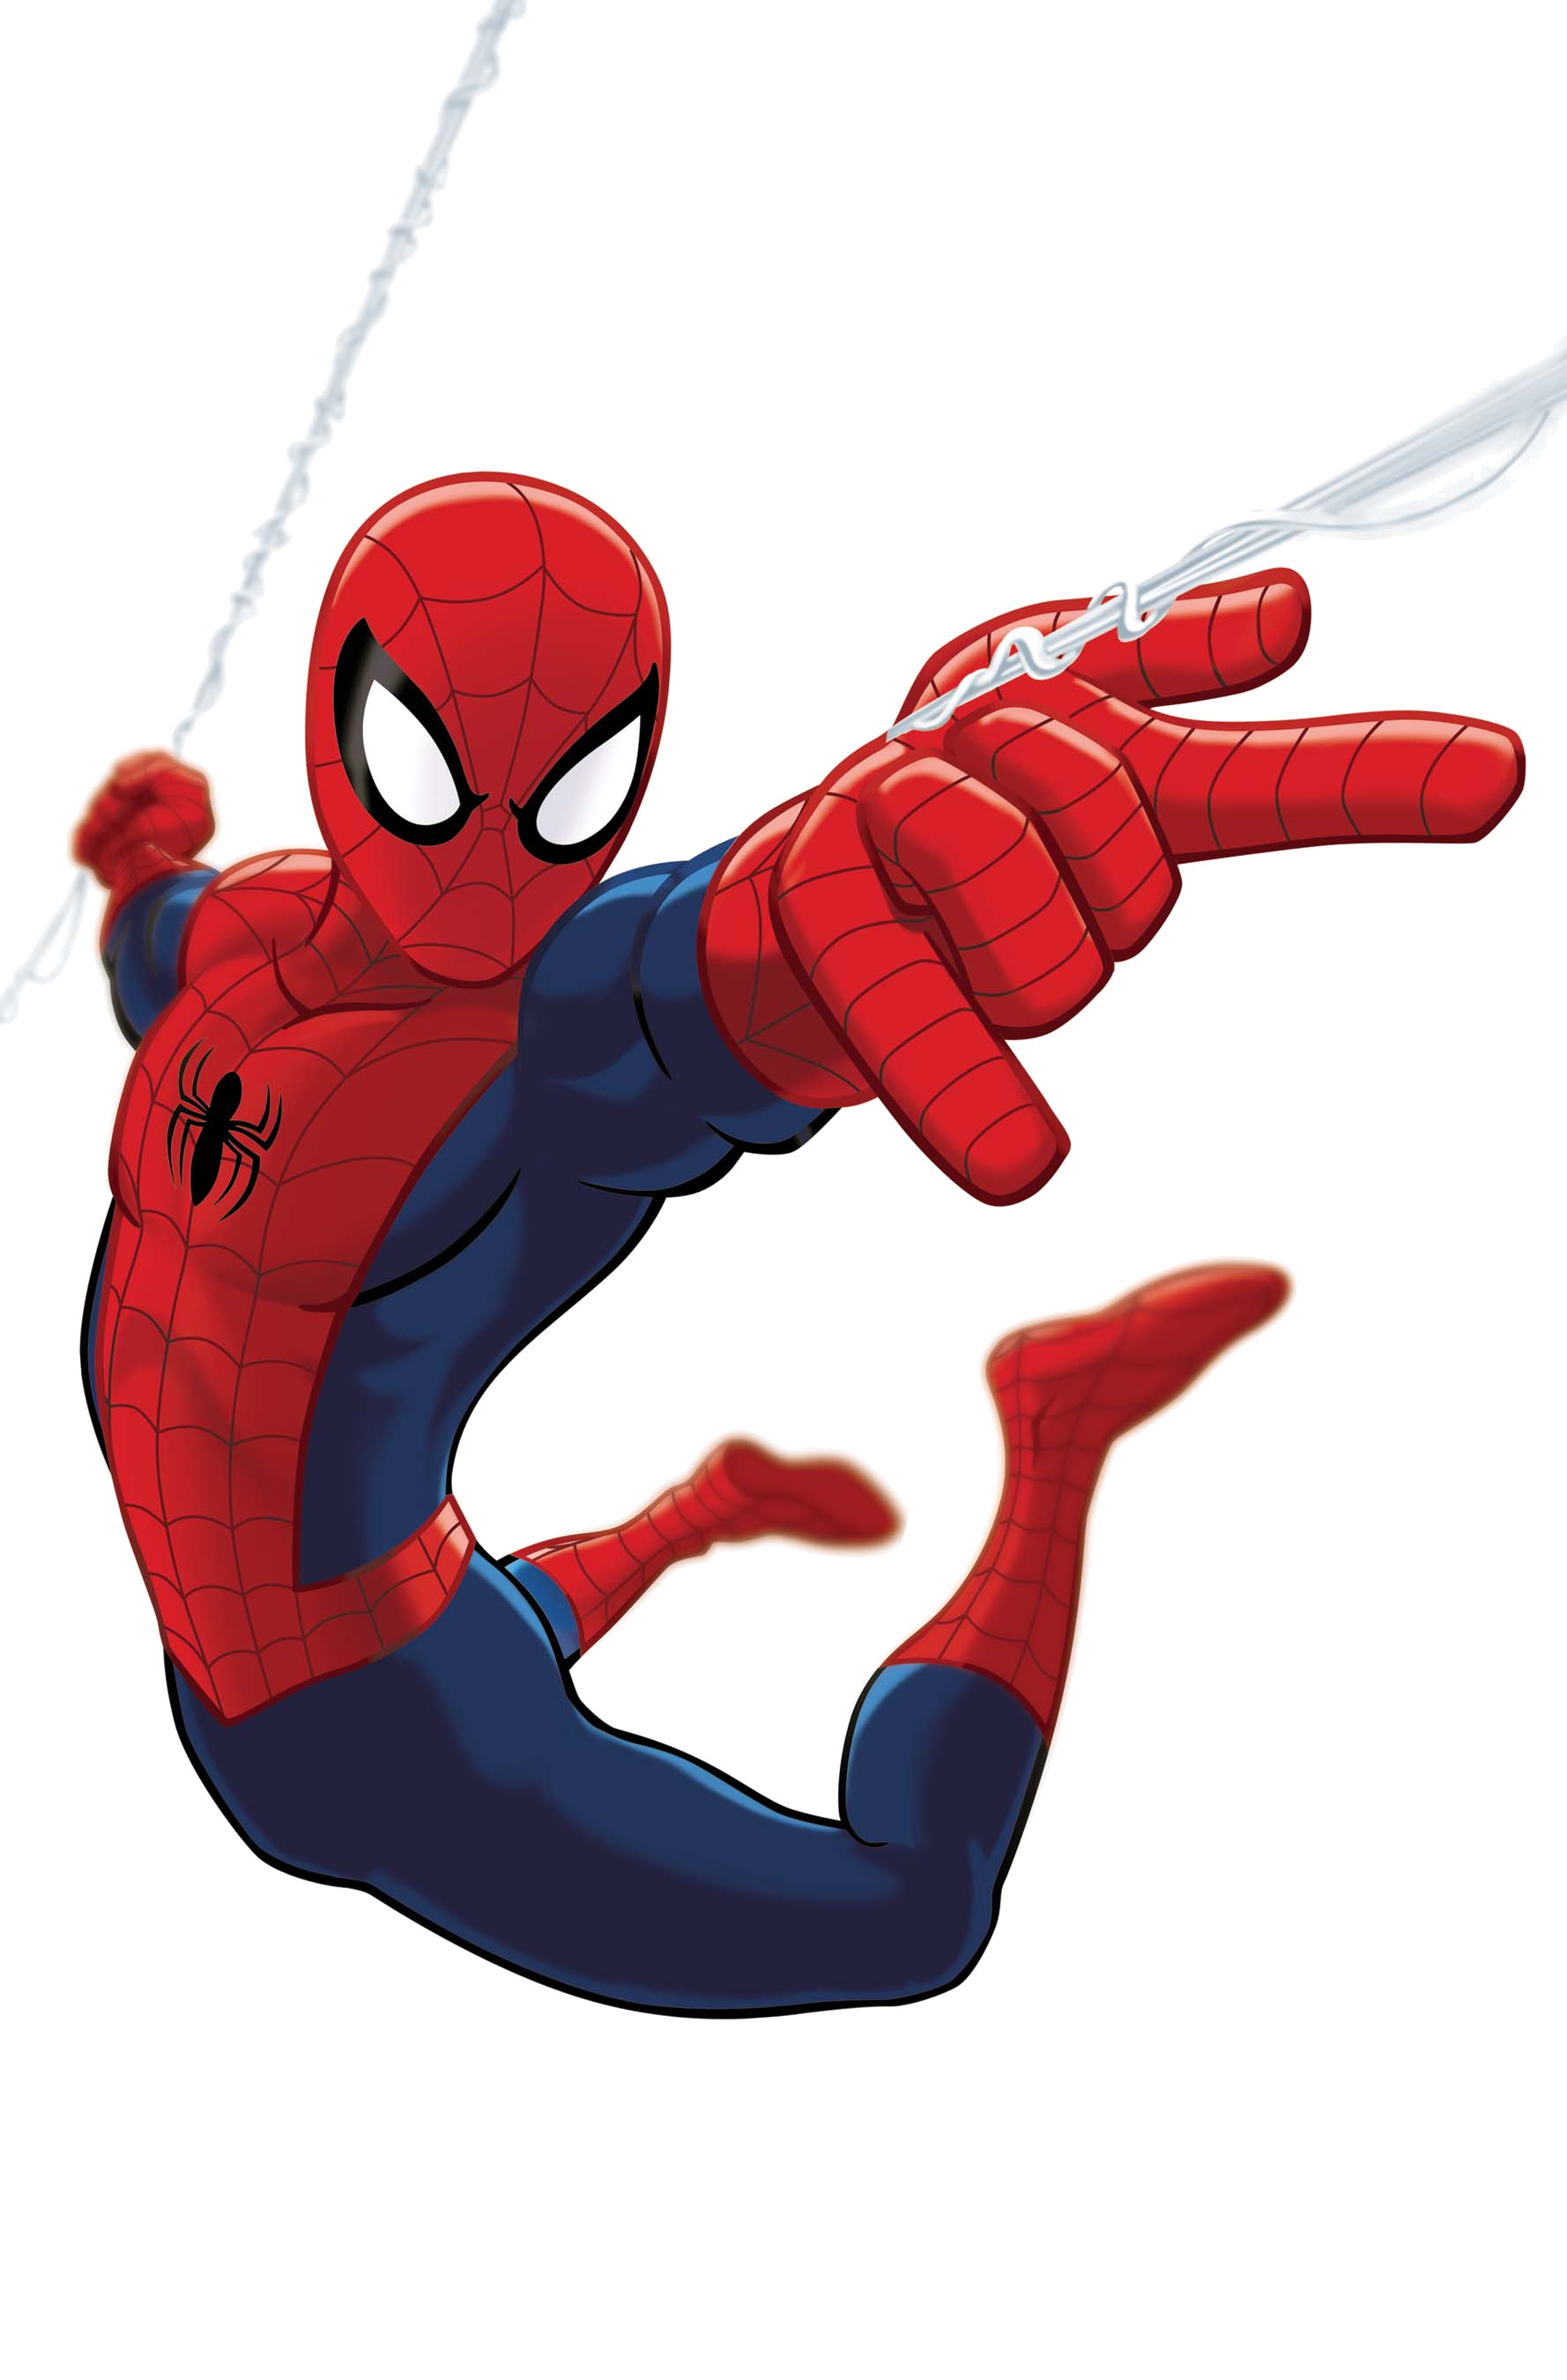 Spider Man. Ultimate Spider Man Animated Series